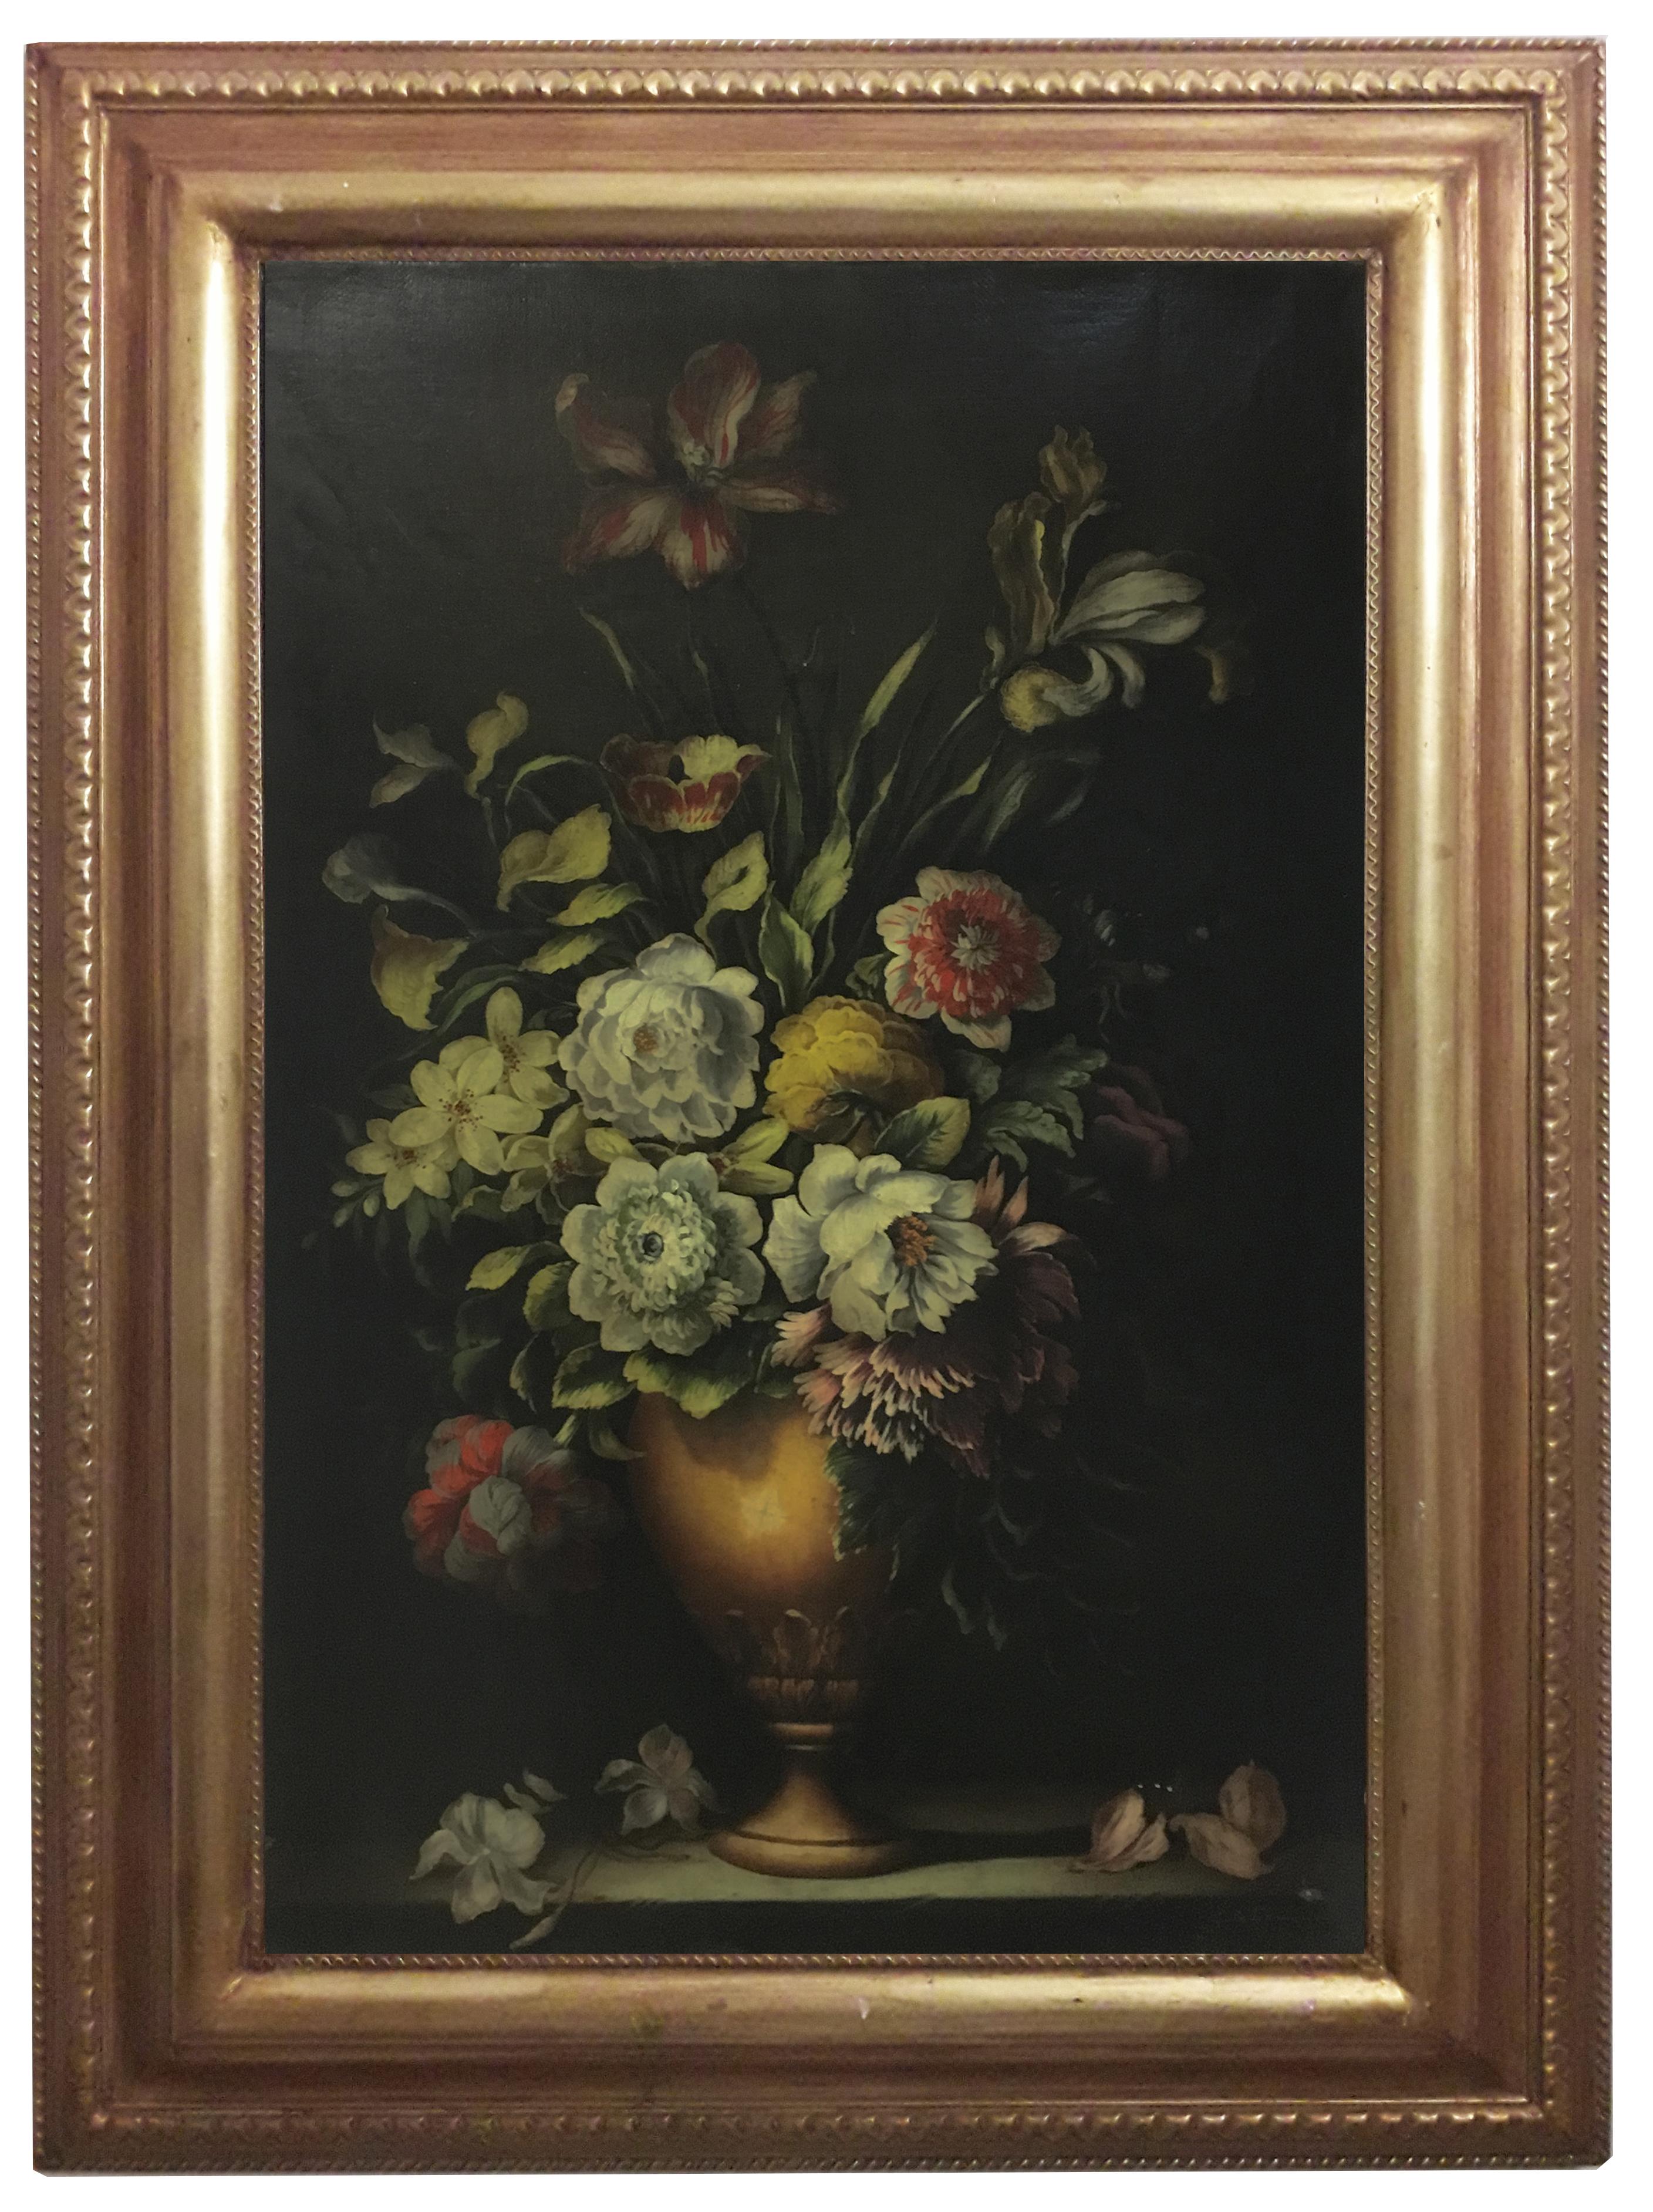 What is Dutch flower painting?